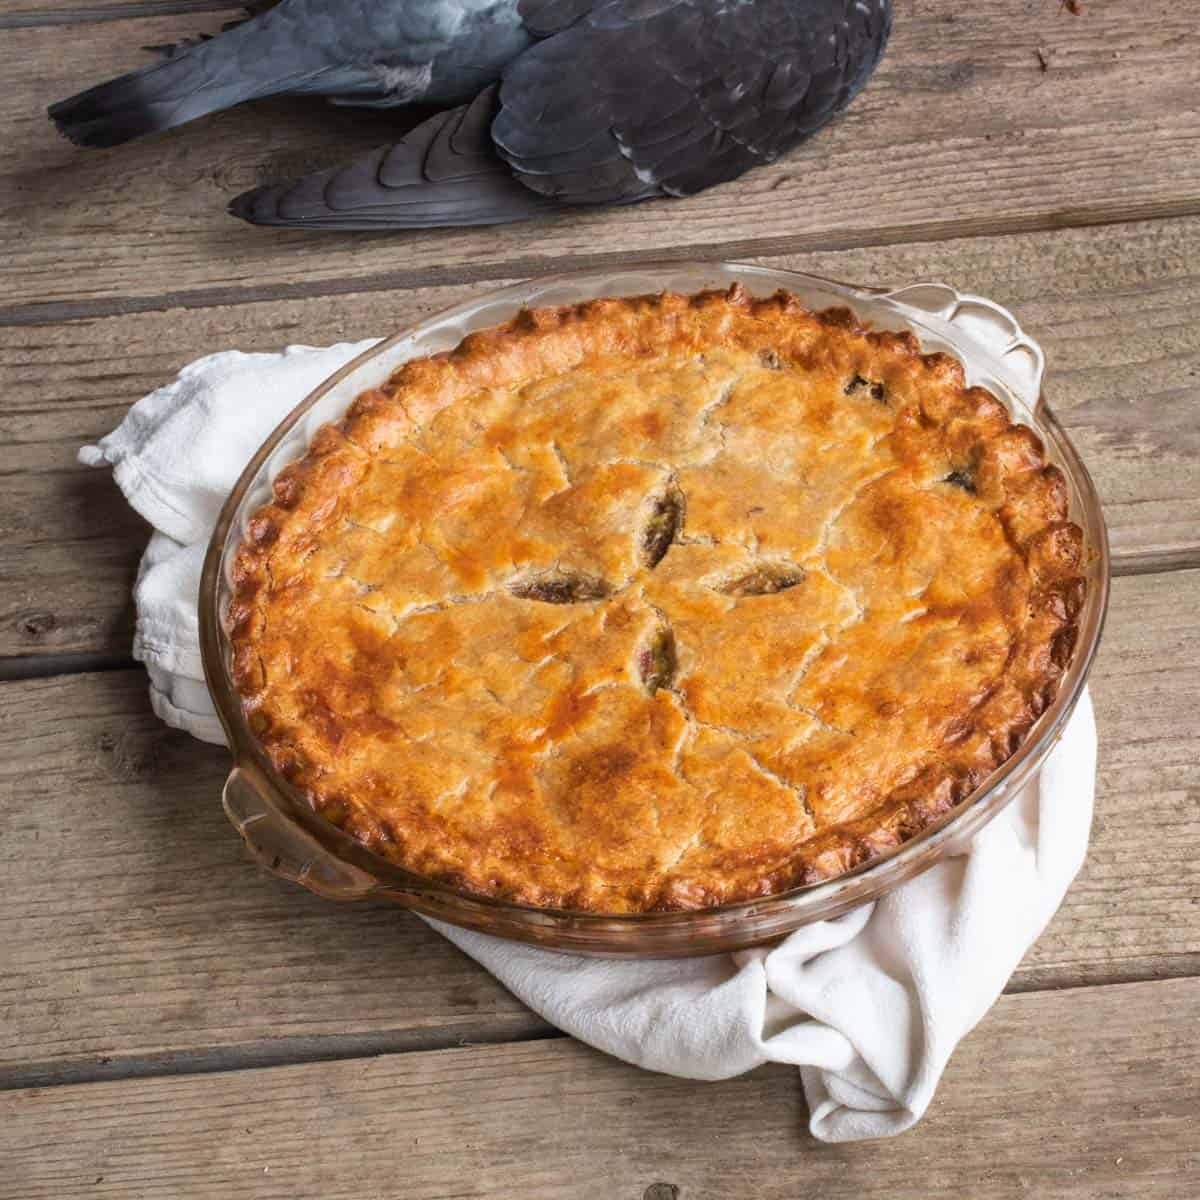 a pie made from pigeon on a picnic table next to a dead pigeon